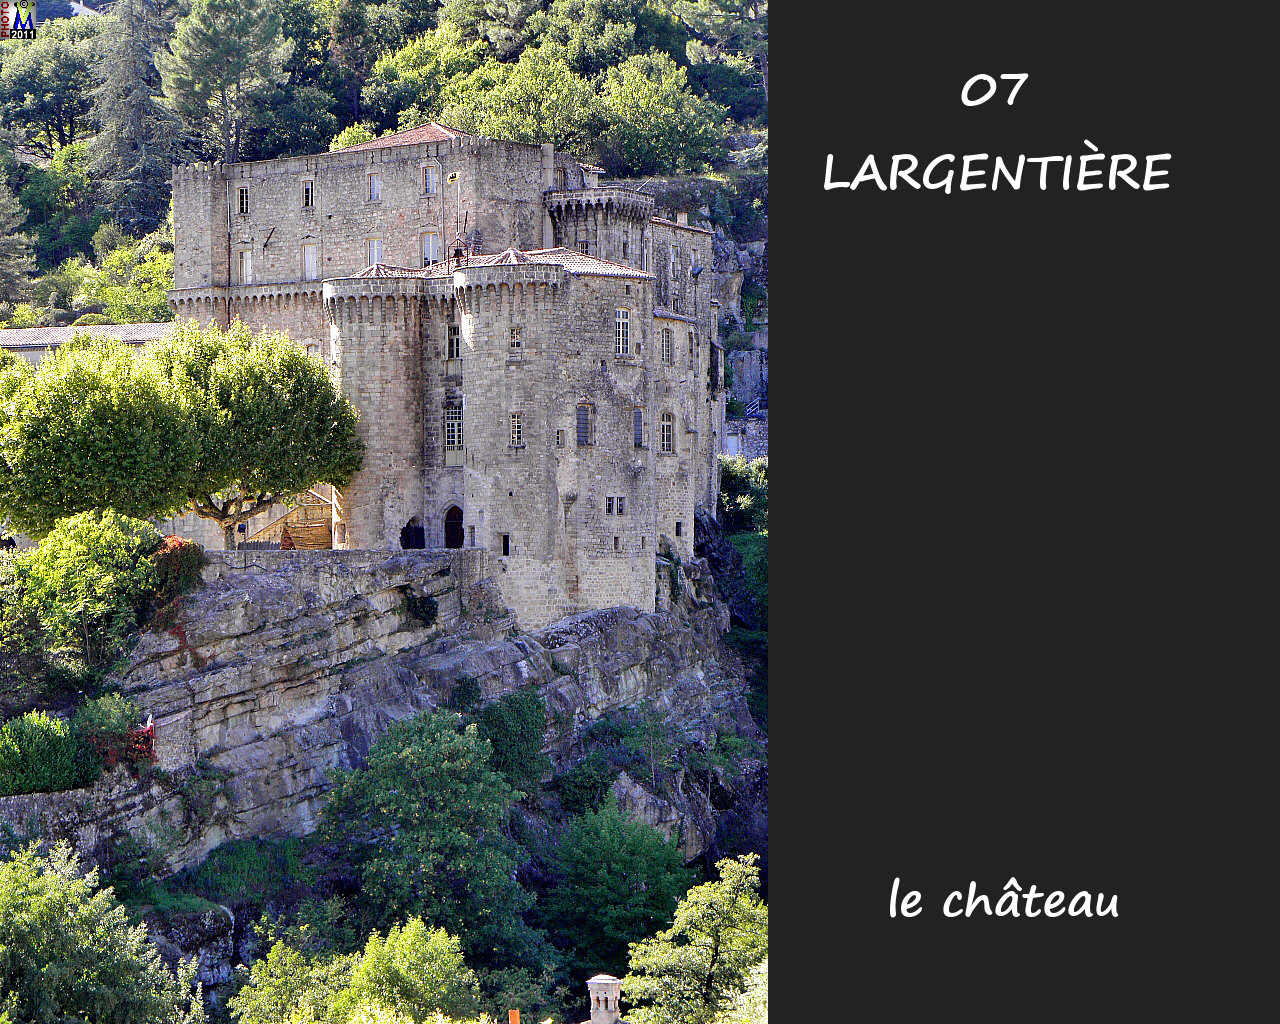 07LARGENTIERE_chateau_102.jpg